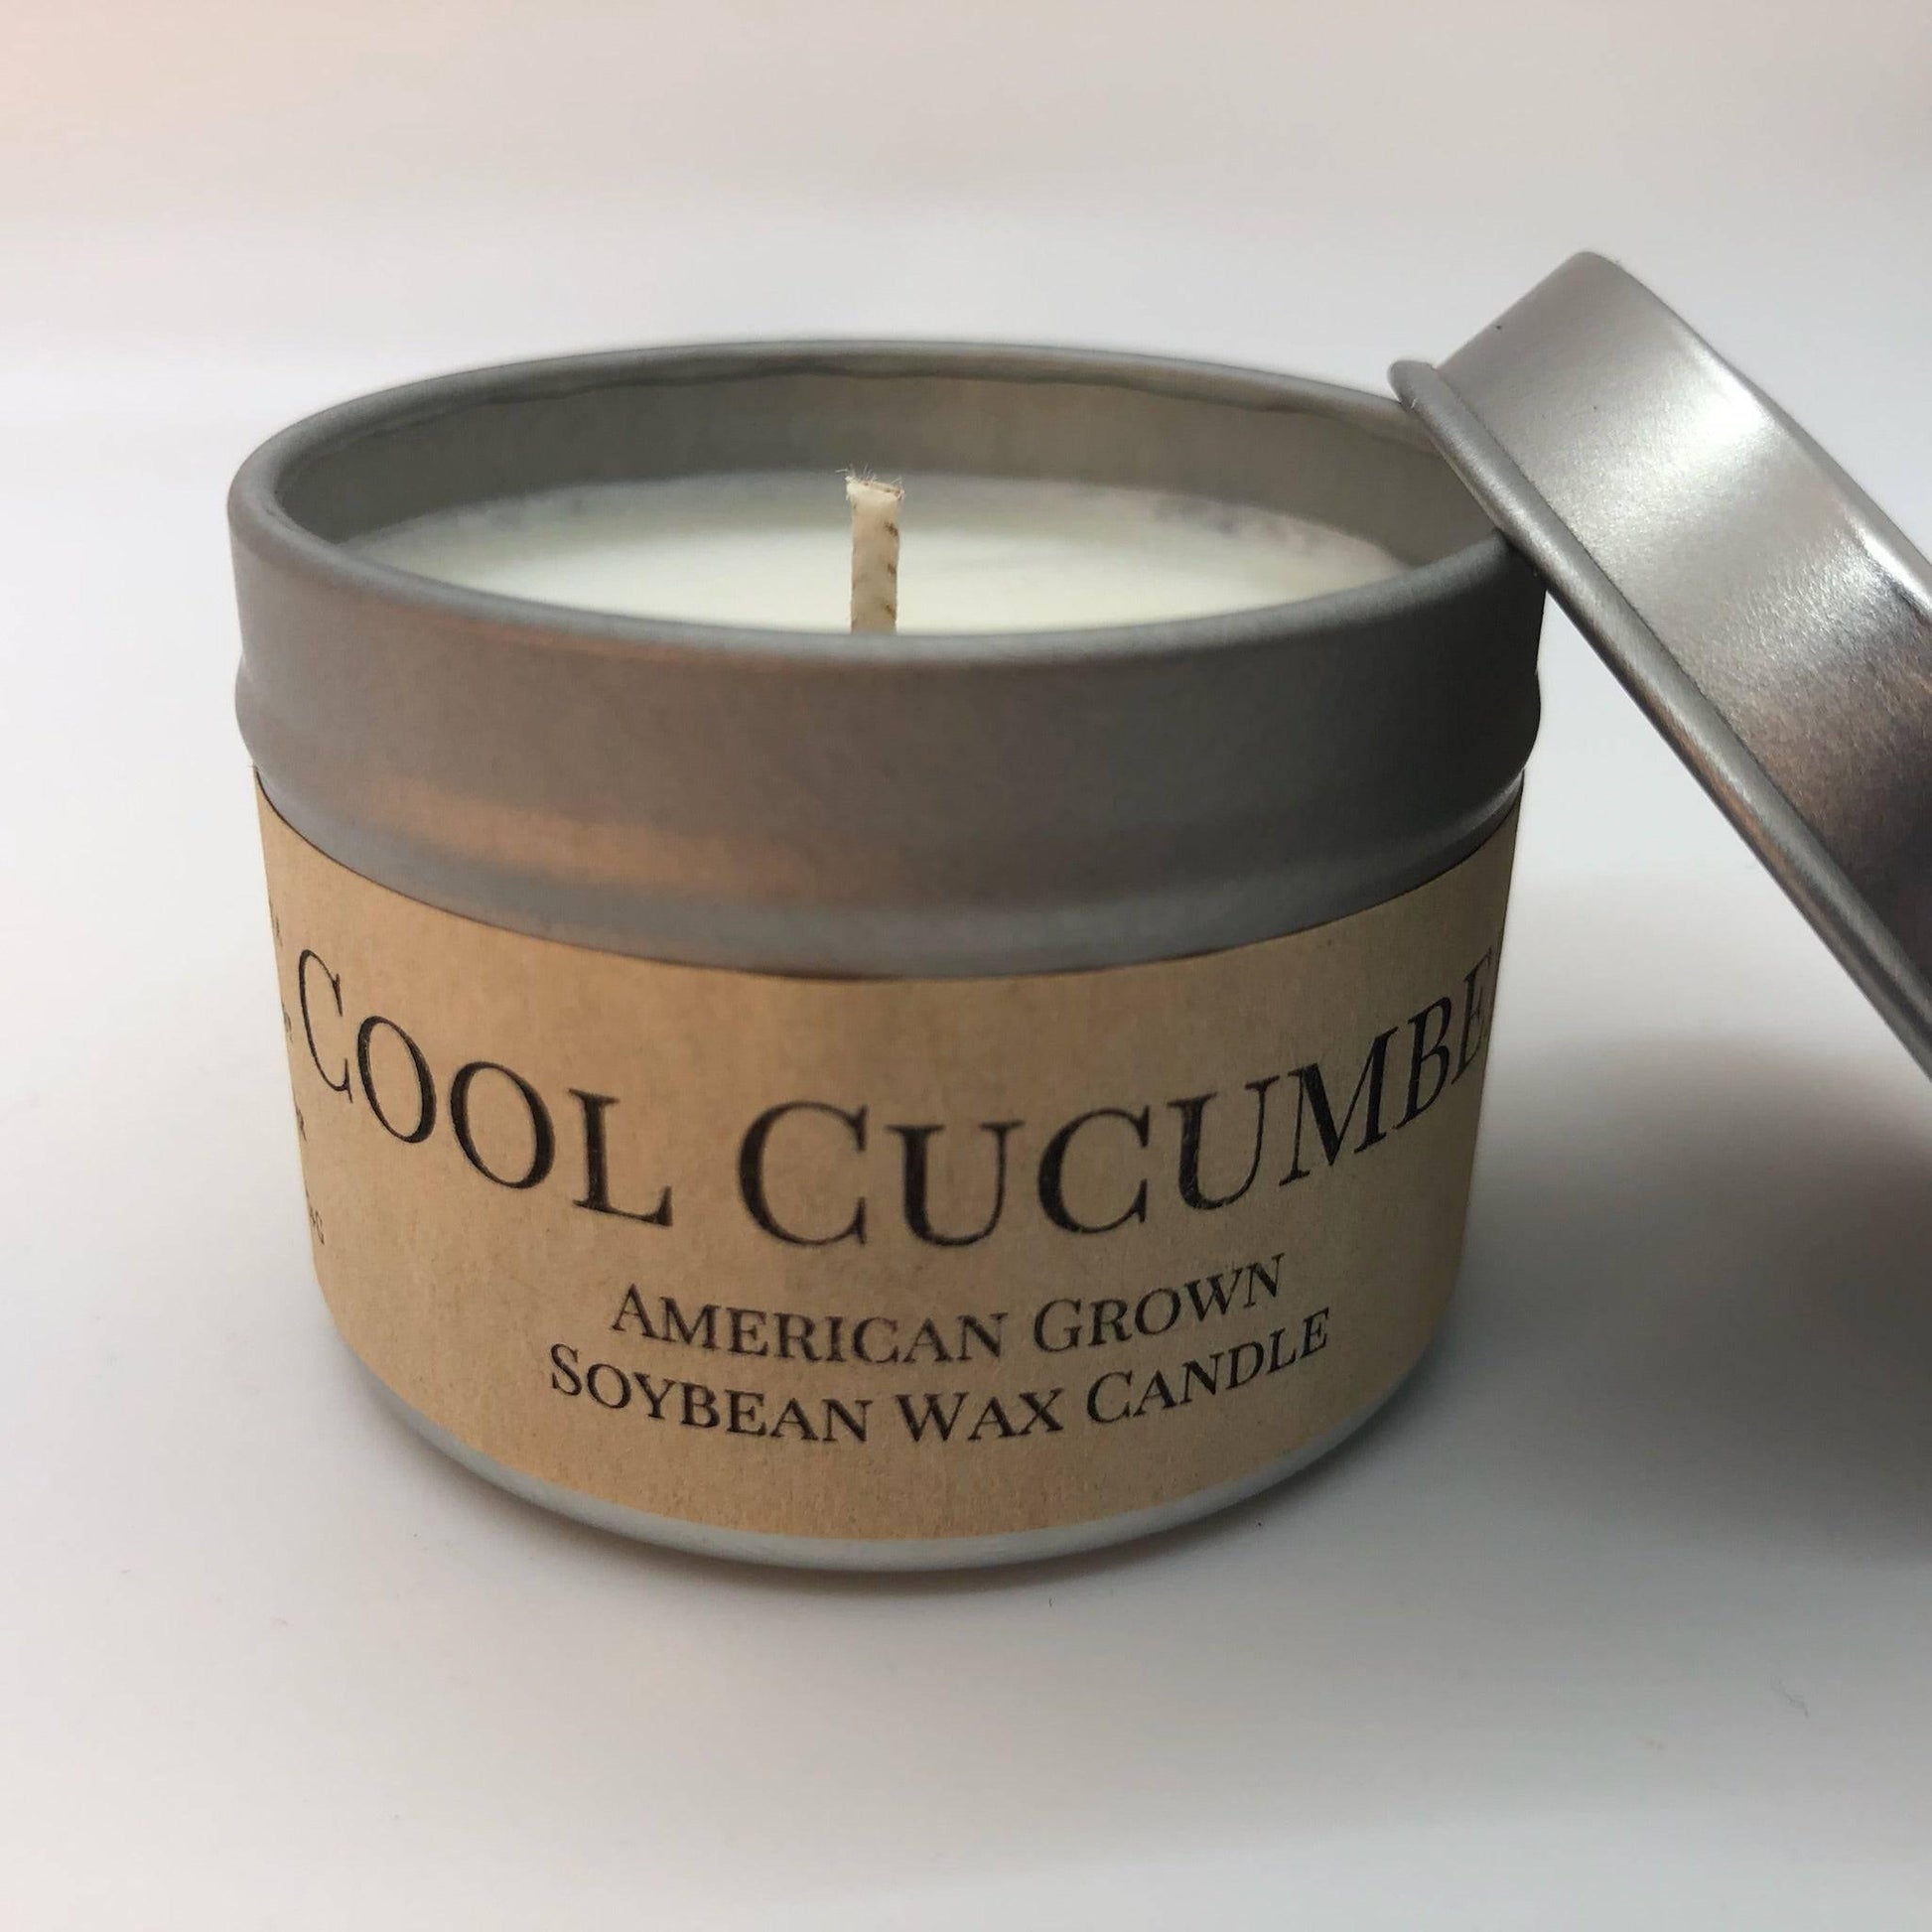 Cool Cucumber Soy Wax Candle | 2 oz Travel Tin - Prairie Fire Candles